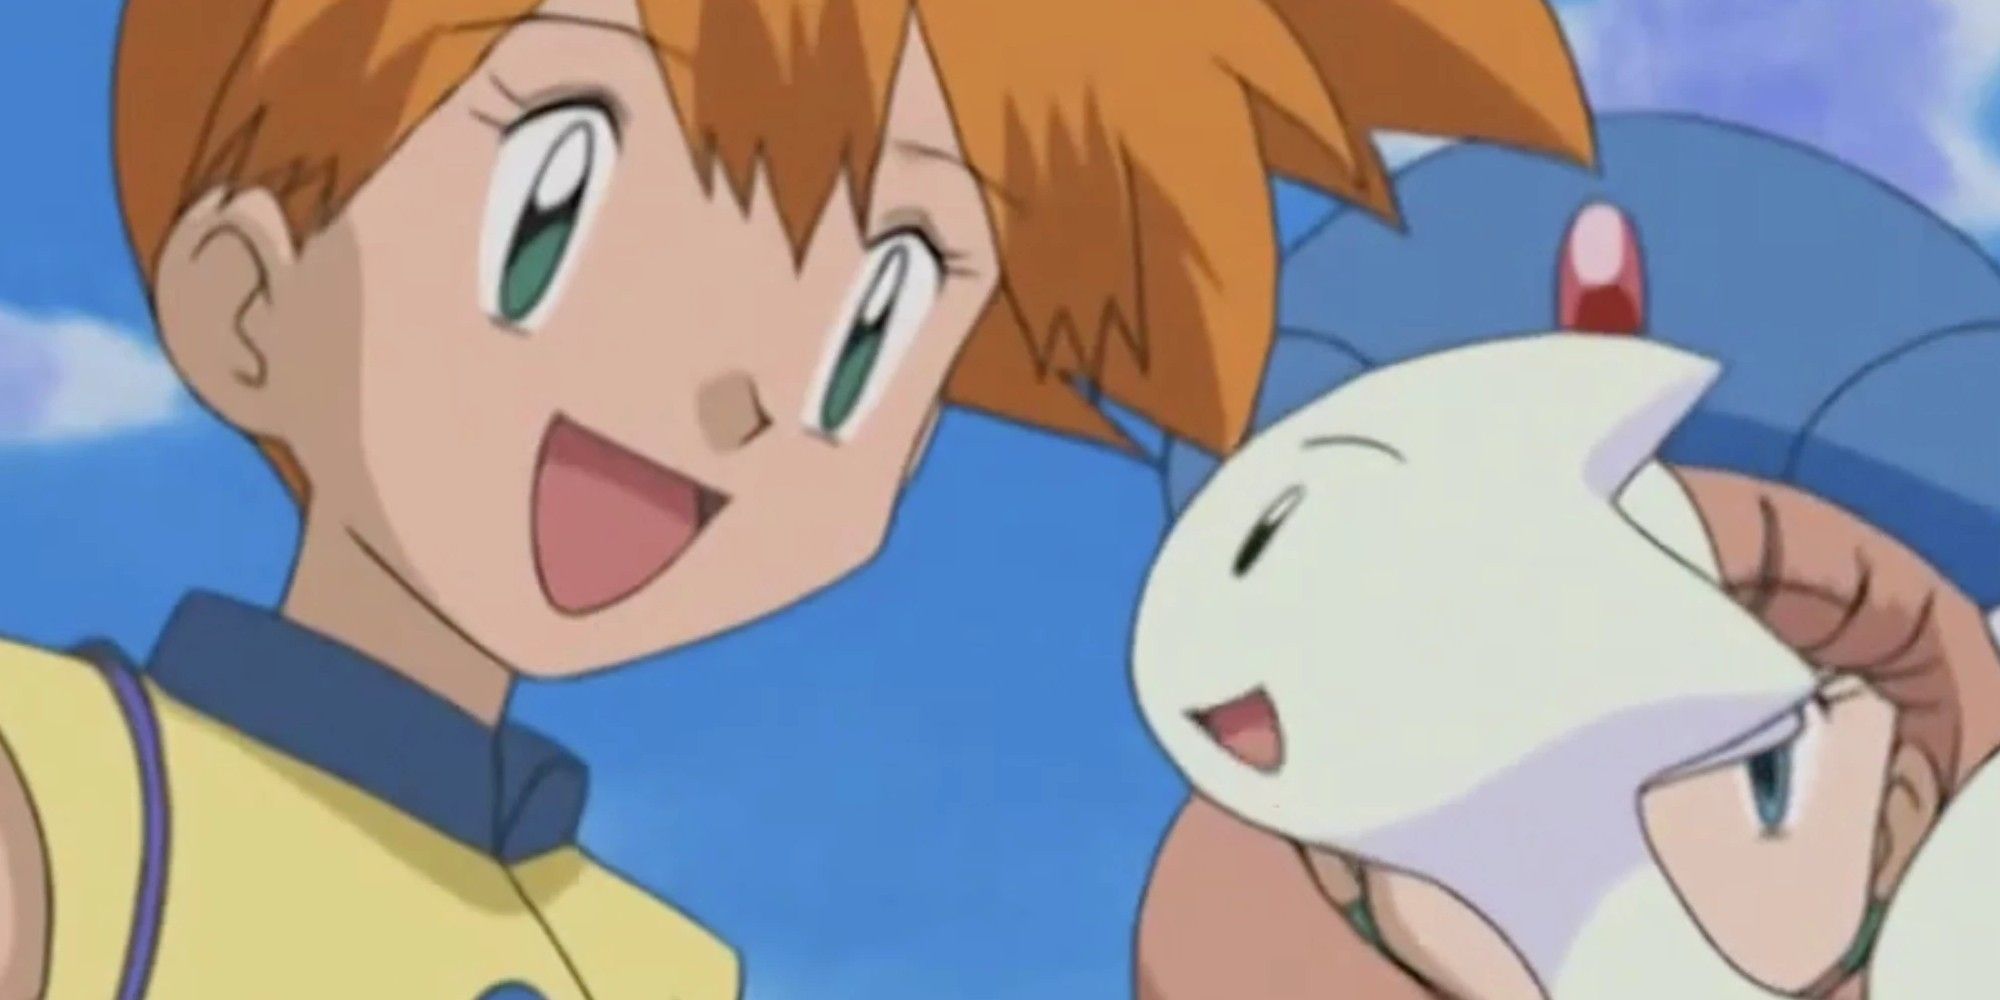 Misty and Togetic, from the Pokemon anime, looking happily at each other